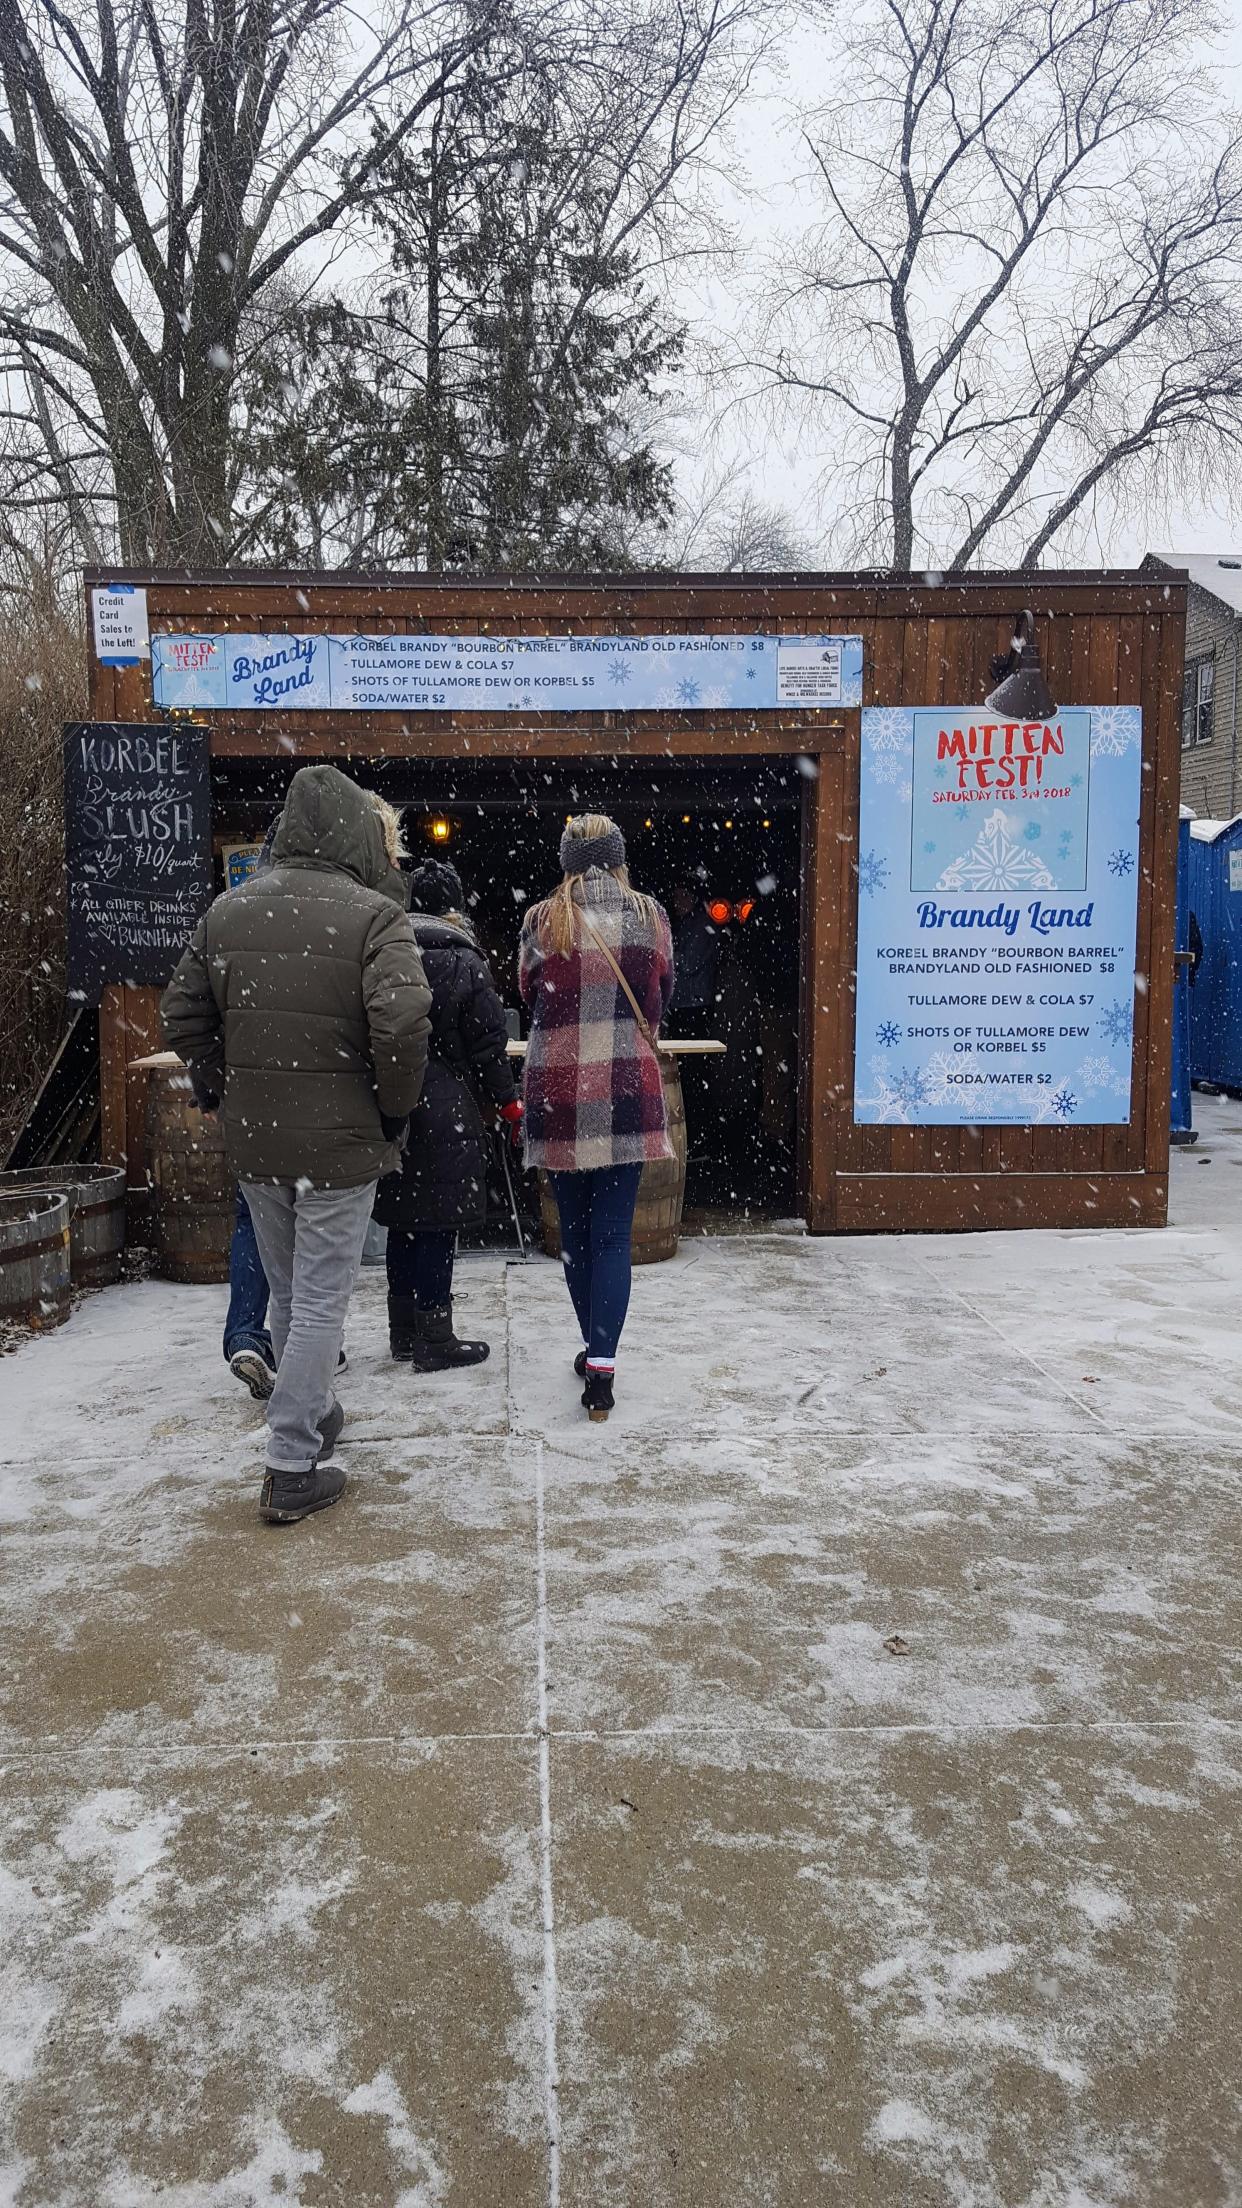 People wait in line to order drinks at Mitten Fest outside Burnhearts, 2599 S. Logan Ave., in Milwaukee's Bay View neighborhood on Feb. 3, 2018.